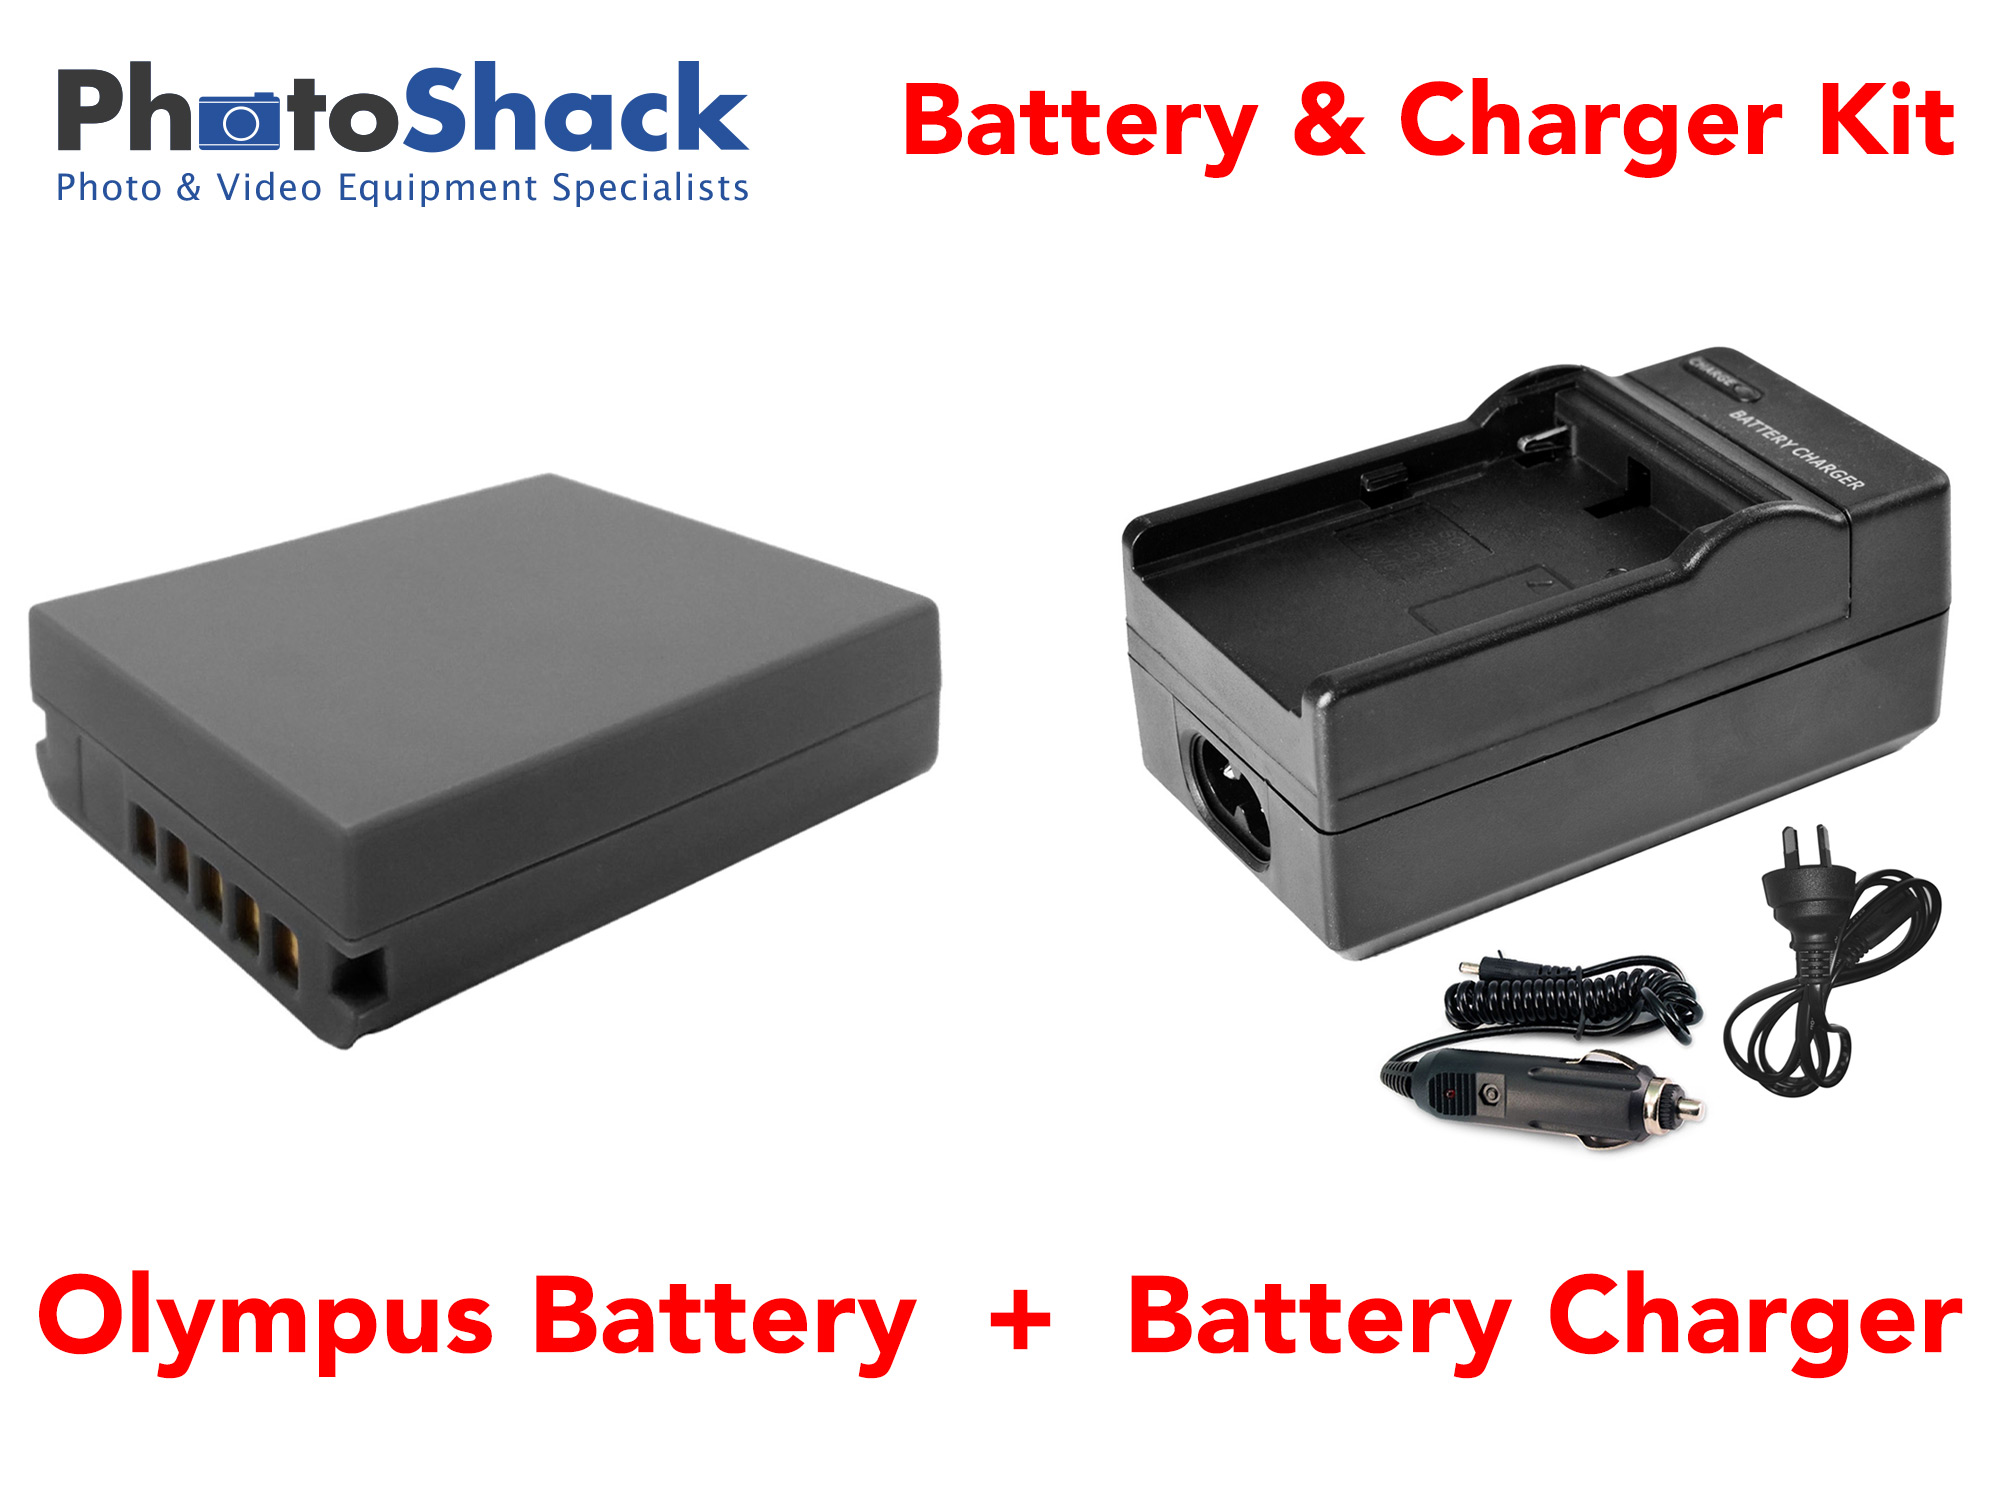 Charger & Battery Kit for Olympus Cameras